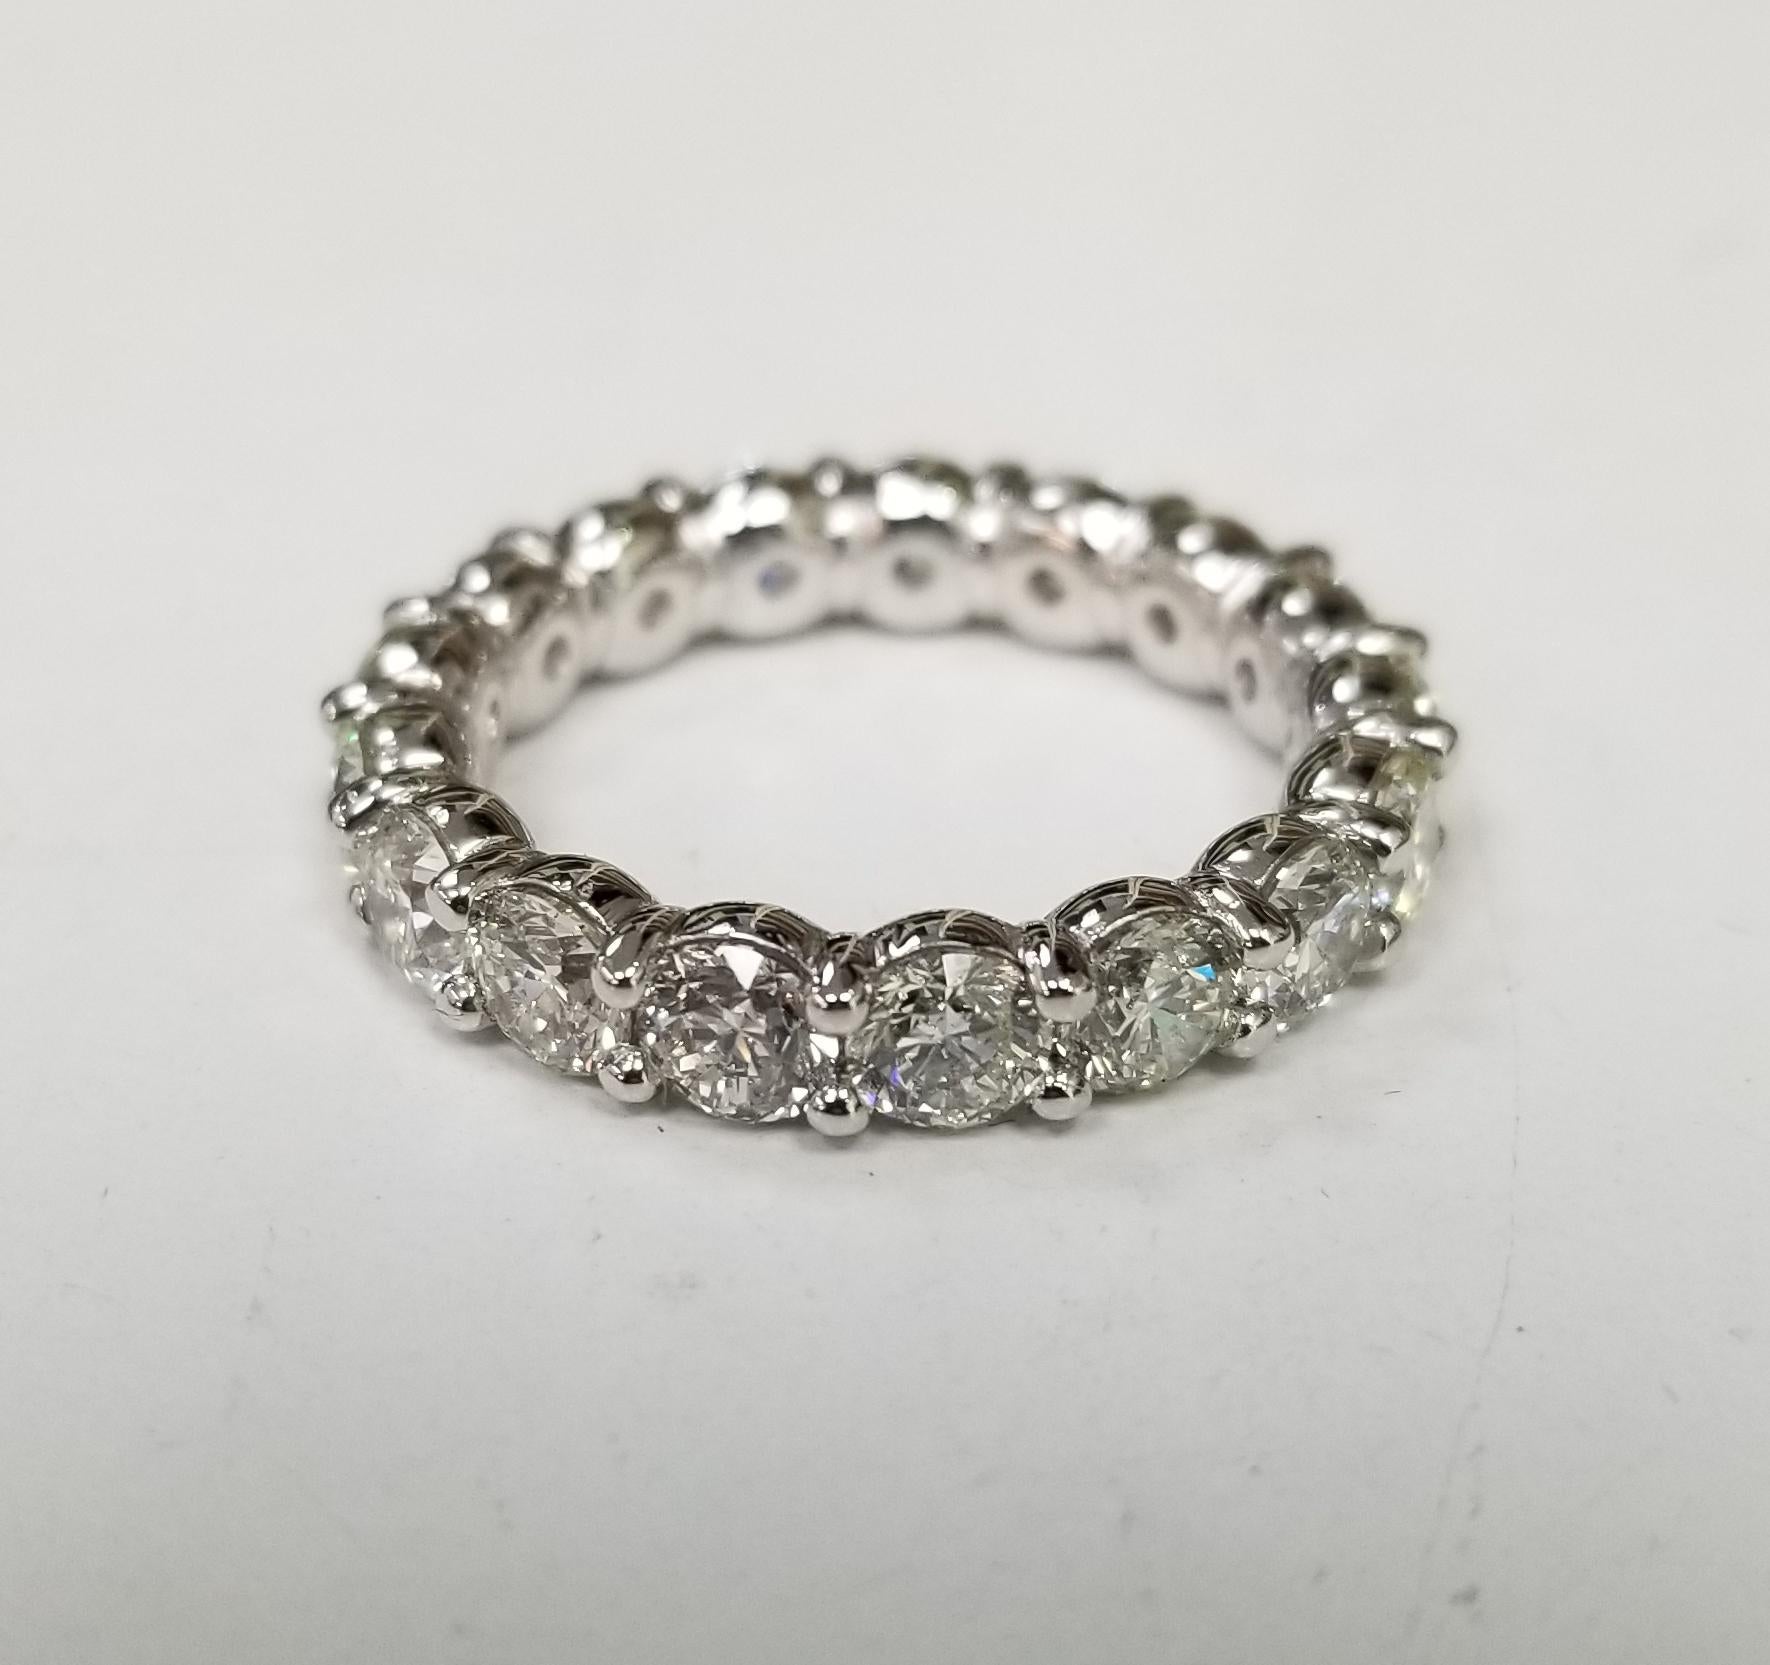  BRILLIANT CUT DIAMOND ETERNITY RING IN PLATINUM 5.10 CTW. Set in comfort fit and shared prongs.
Specifications:
    main stone: BRILLIANT CUT DIAMOND
    diamonds: 17 PIECES
    carat total weight: 5.10
    color: -G
    clarity: VS2
    brand: